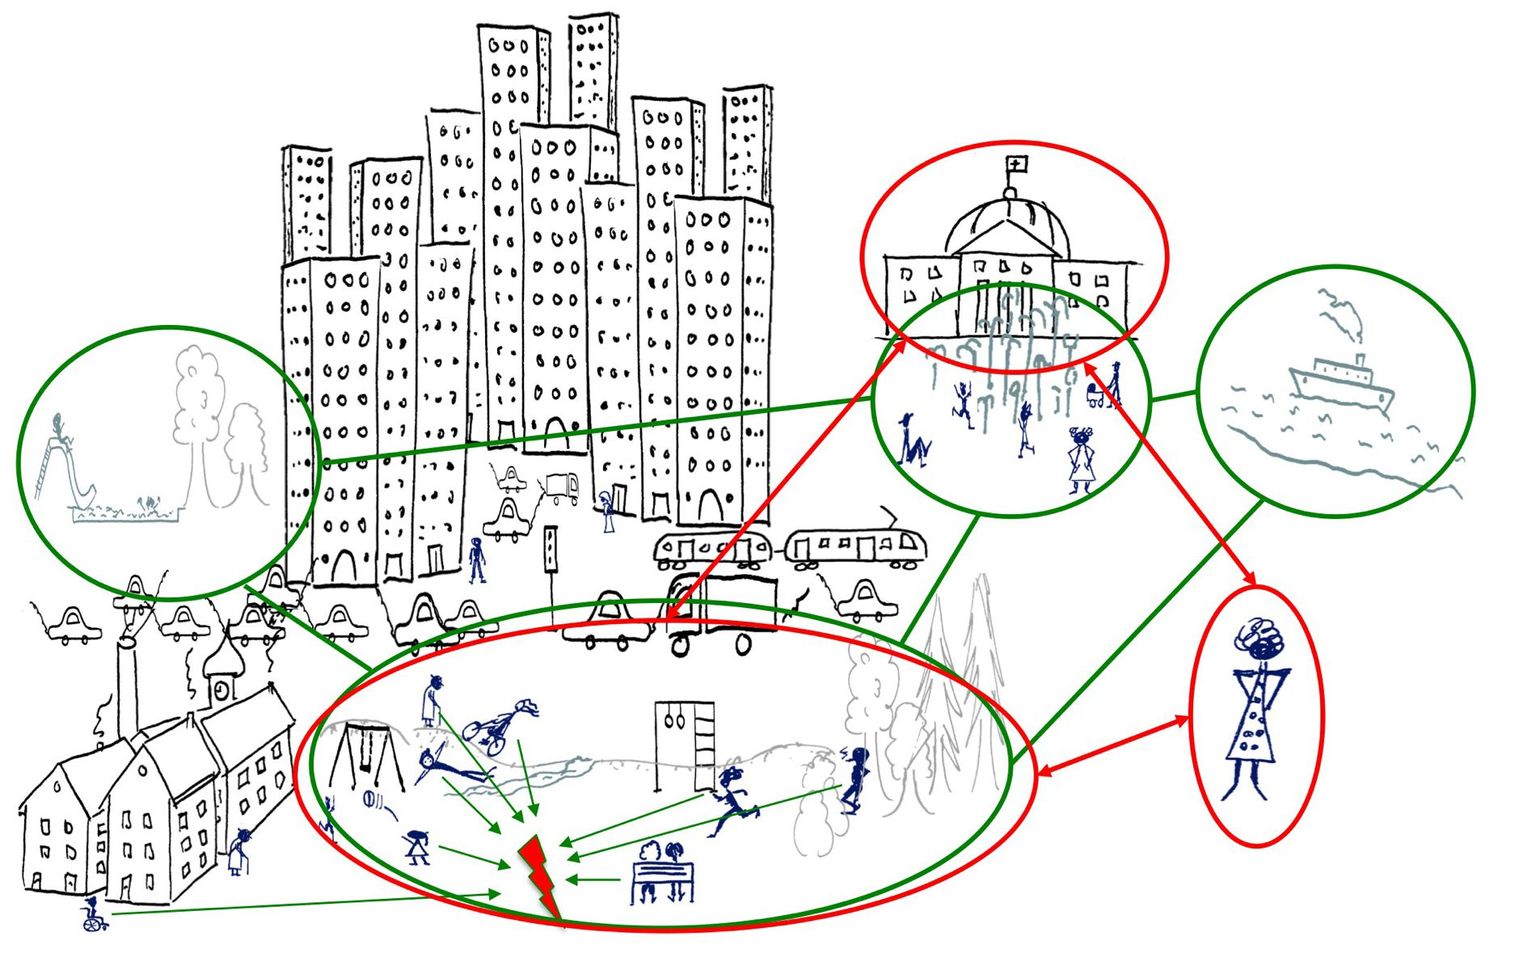 Rich picture on an urban planning problem situation